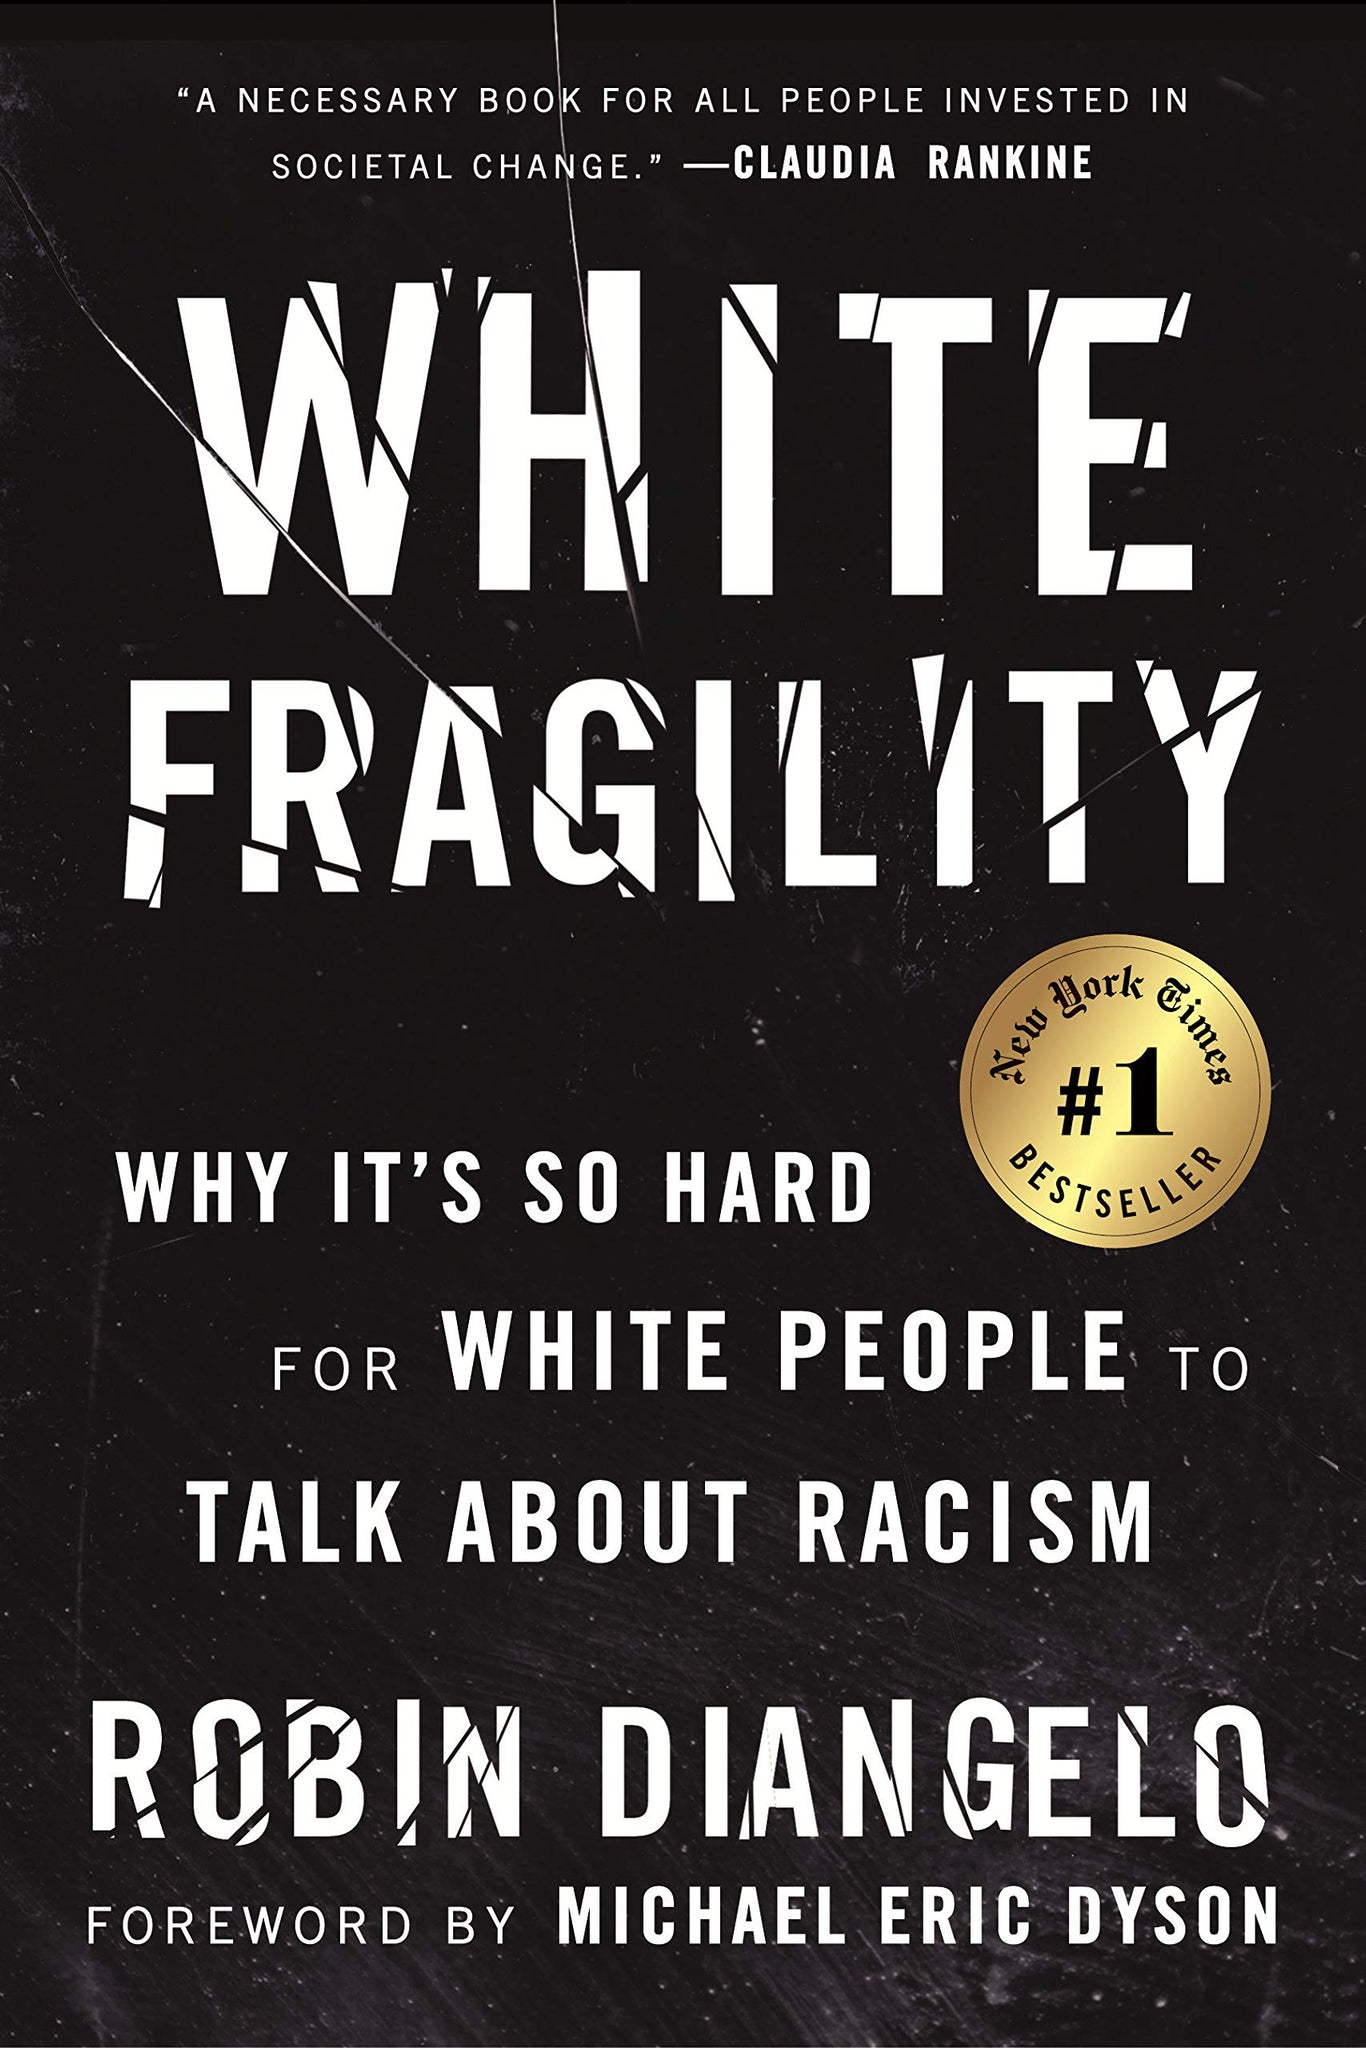 White Fragility: Why It's So Hard for White People to Talk about Racism (Paperback)